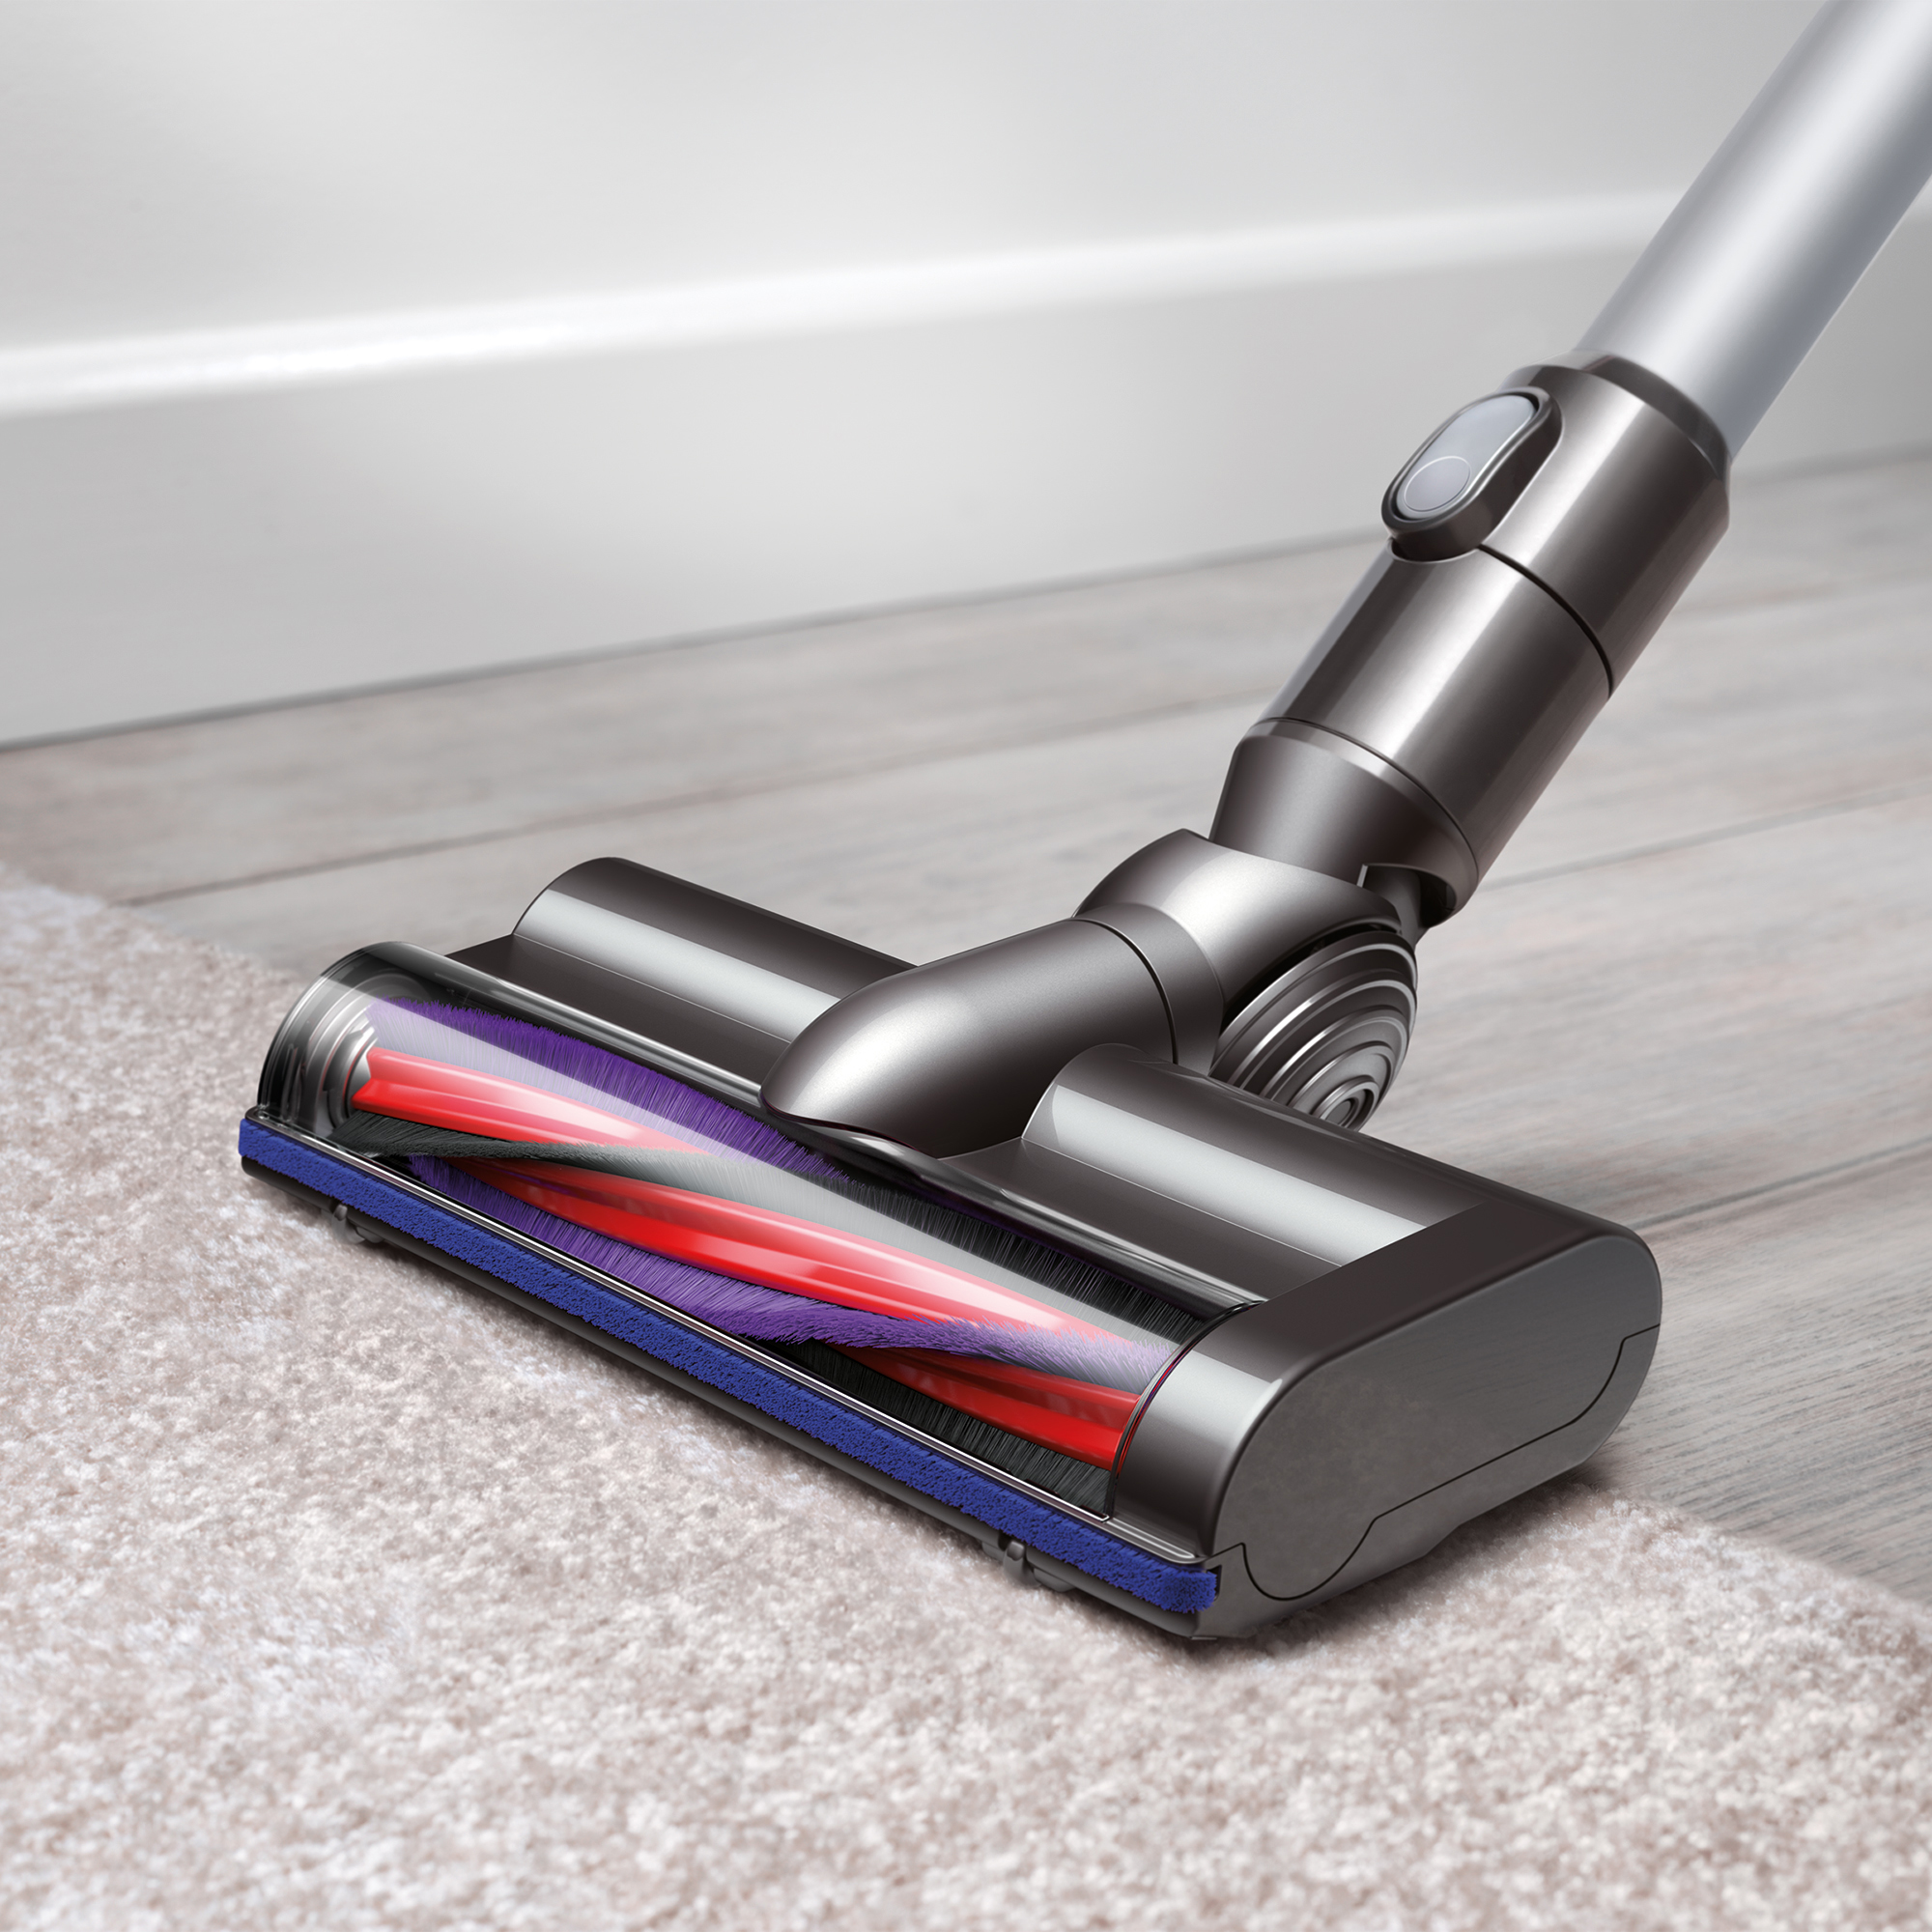 Dyson DC59 Animal Cordless Vacuum Cleaner - image 3 of 4